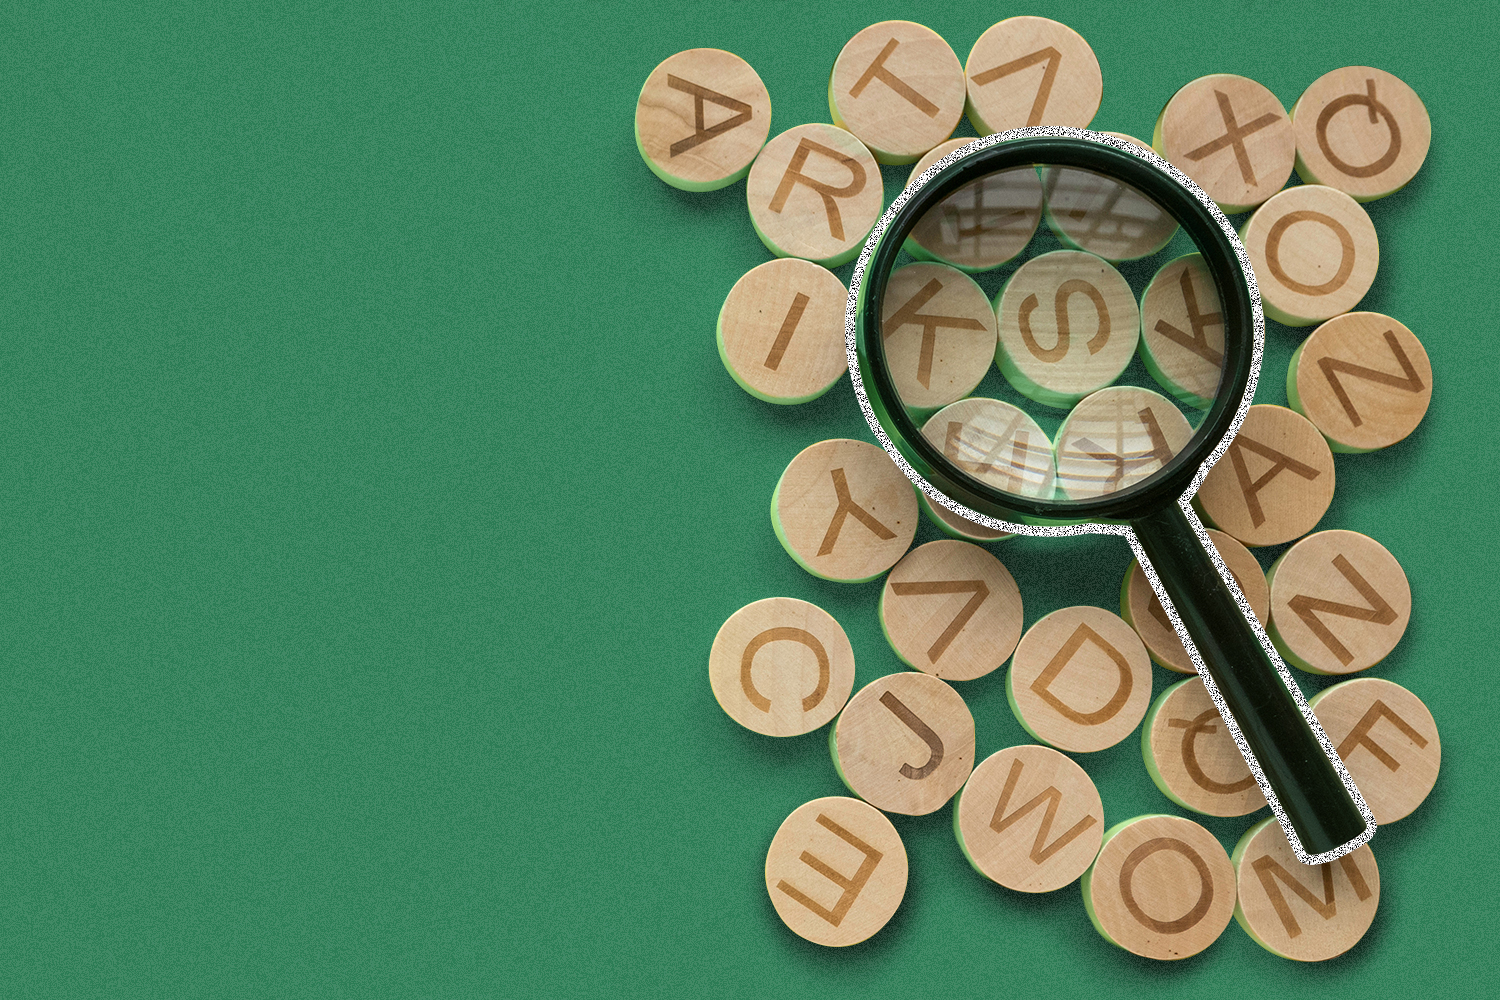 A magnifying glass sits atop circular pieces with letters on them.